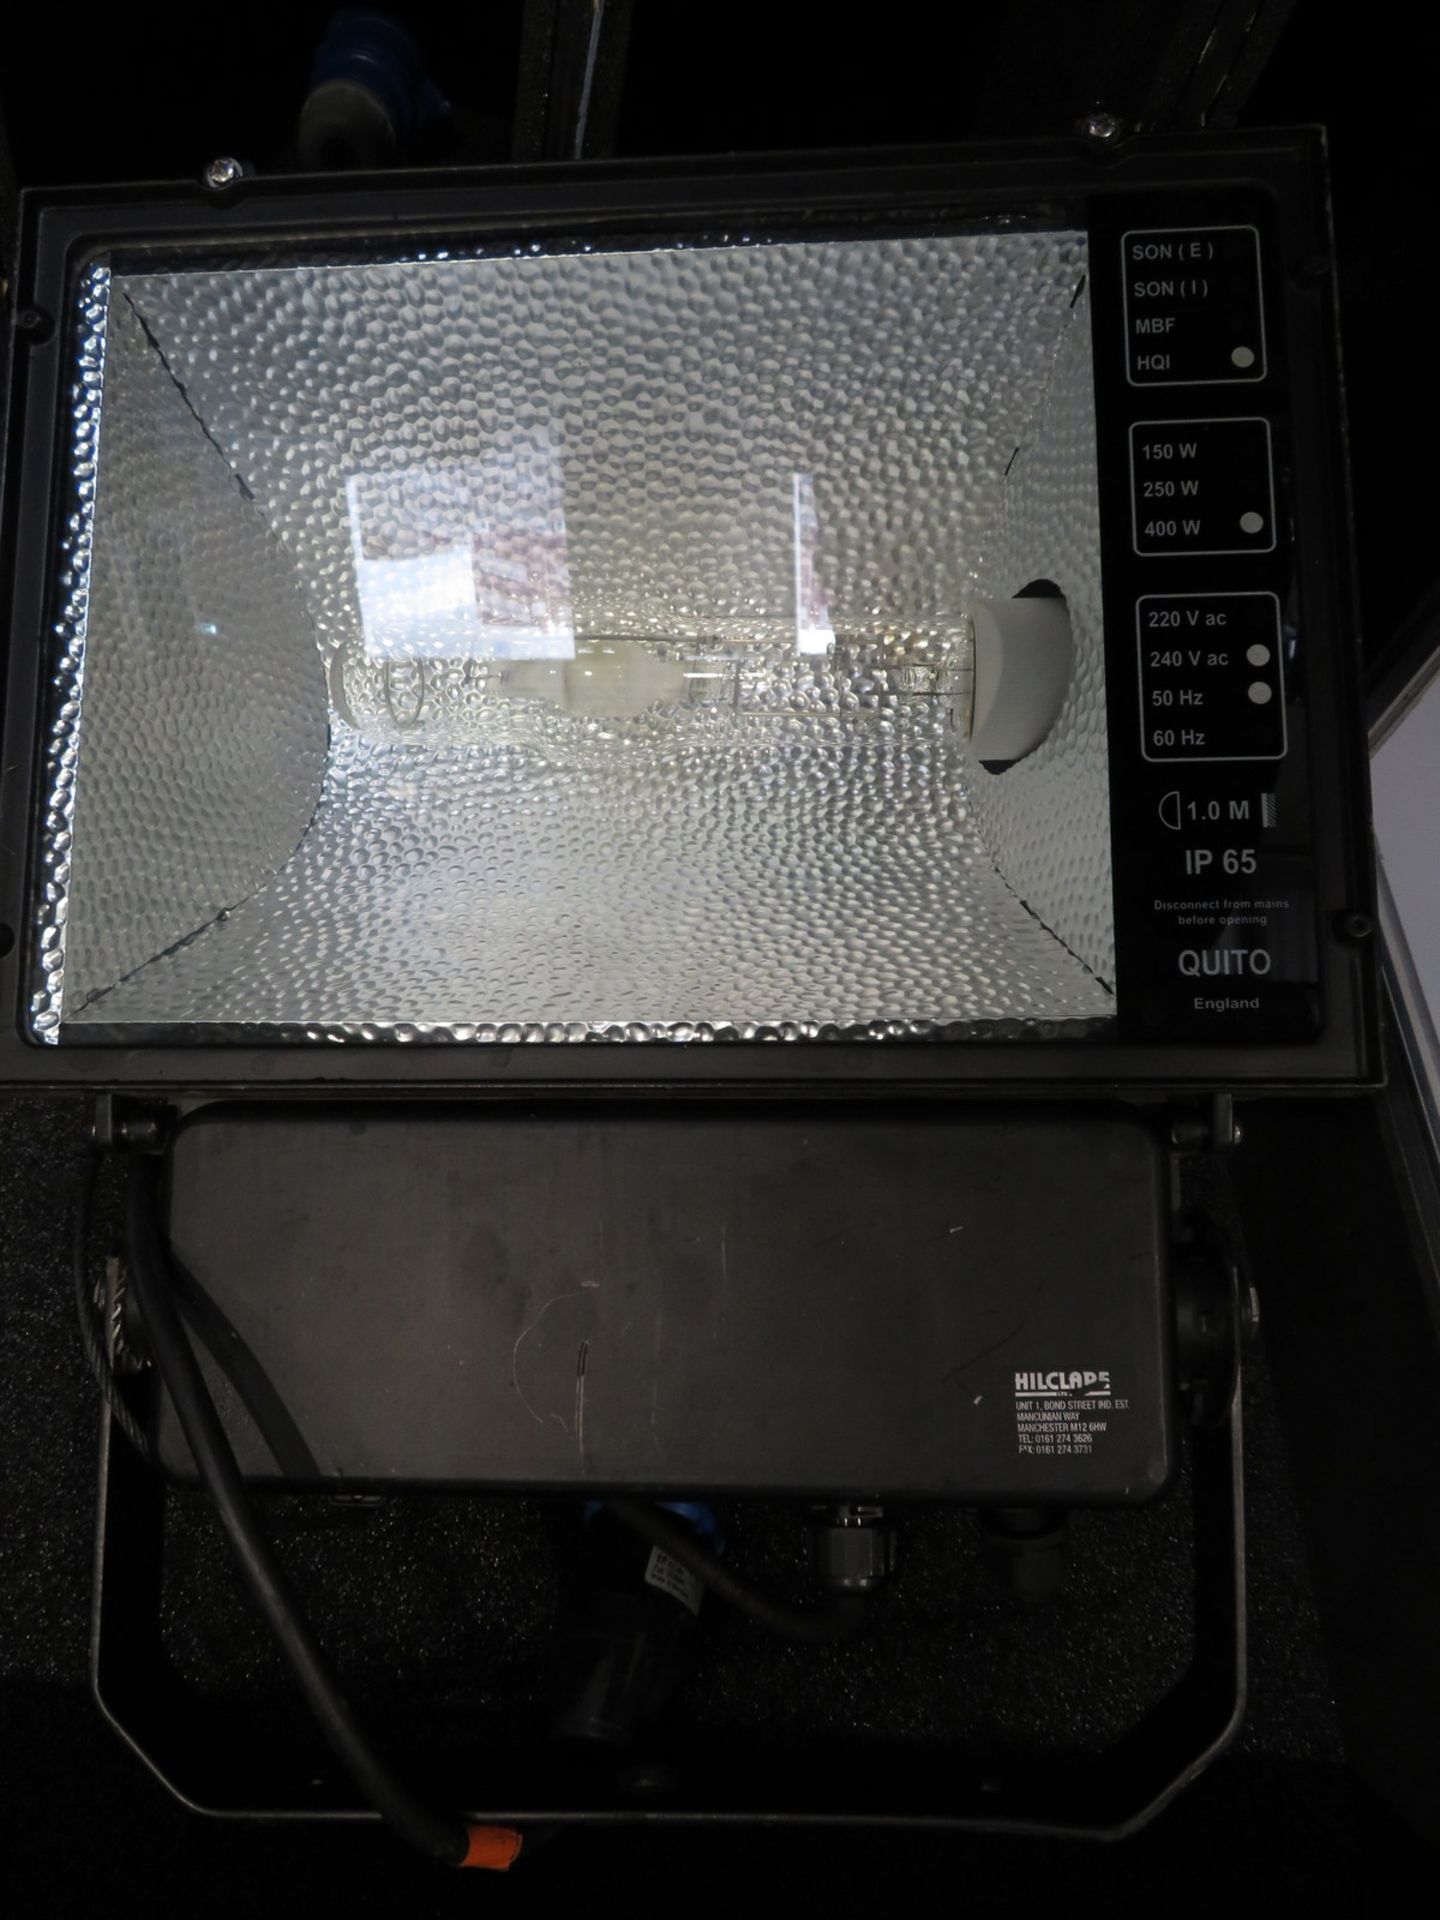 5x HQI 400w Floodlights in flight case. Includes safety bonds. 4 in working condition & 1 - Image 5 of 9